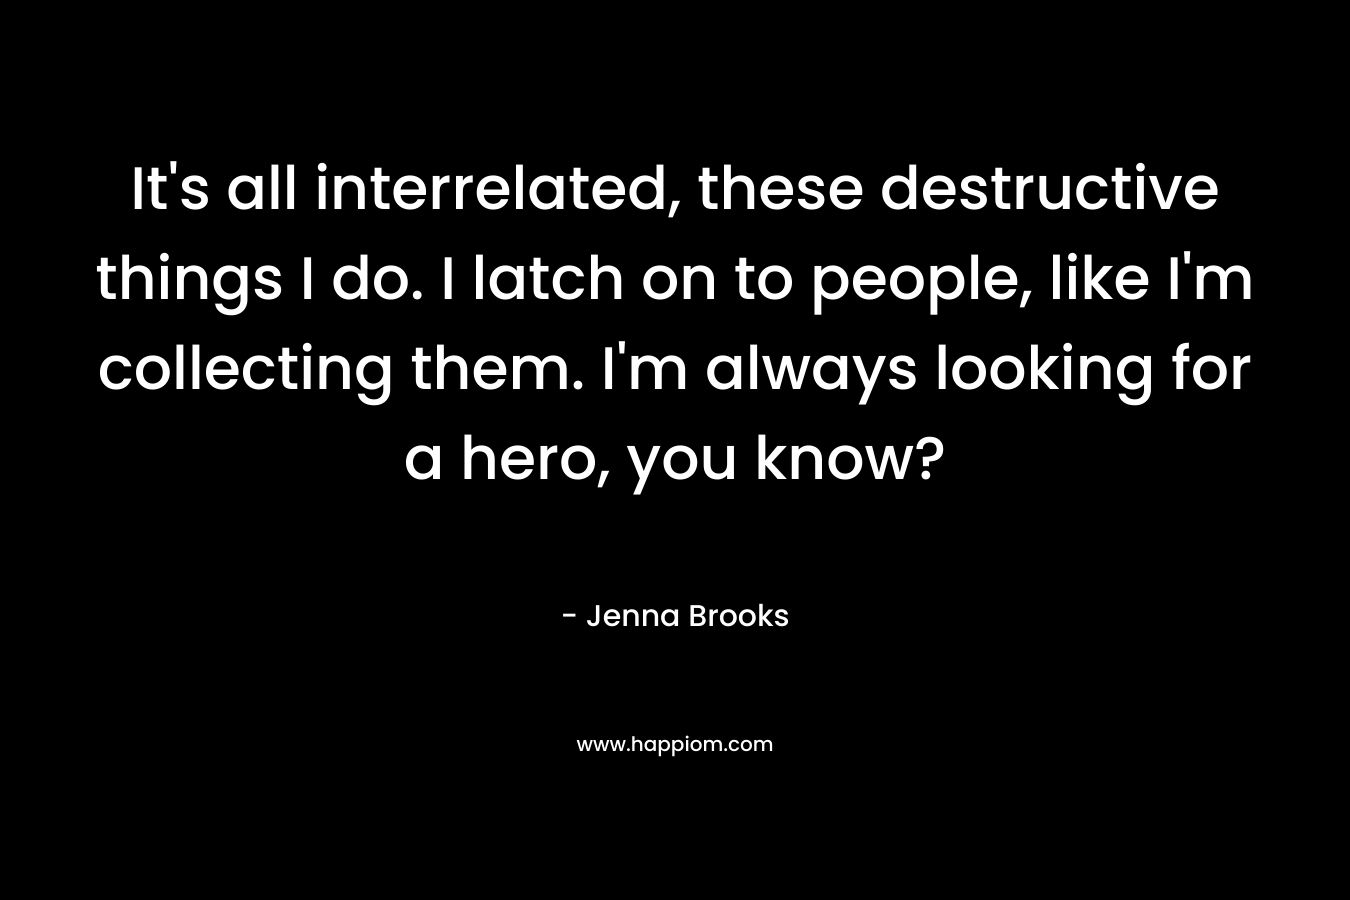 It's all interrelated, these destructive things I do. I latch on to people, like I'm collecting them. I'm always looking for a hero, you know?